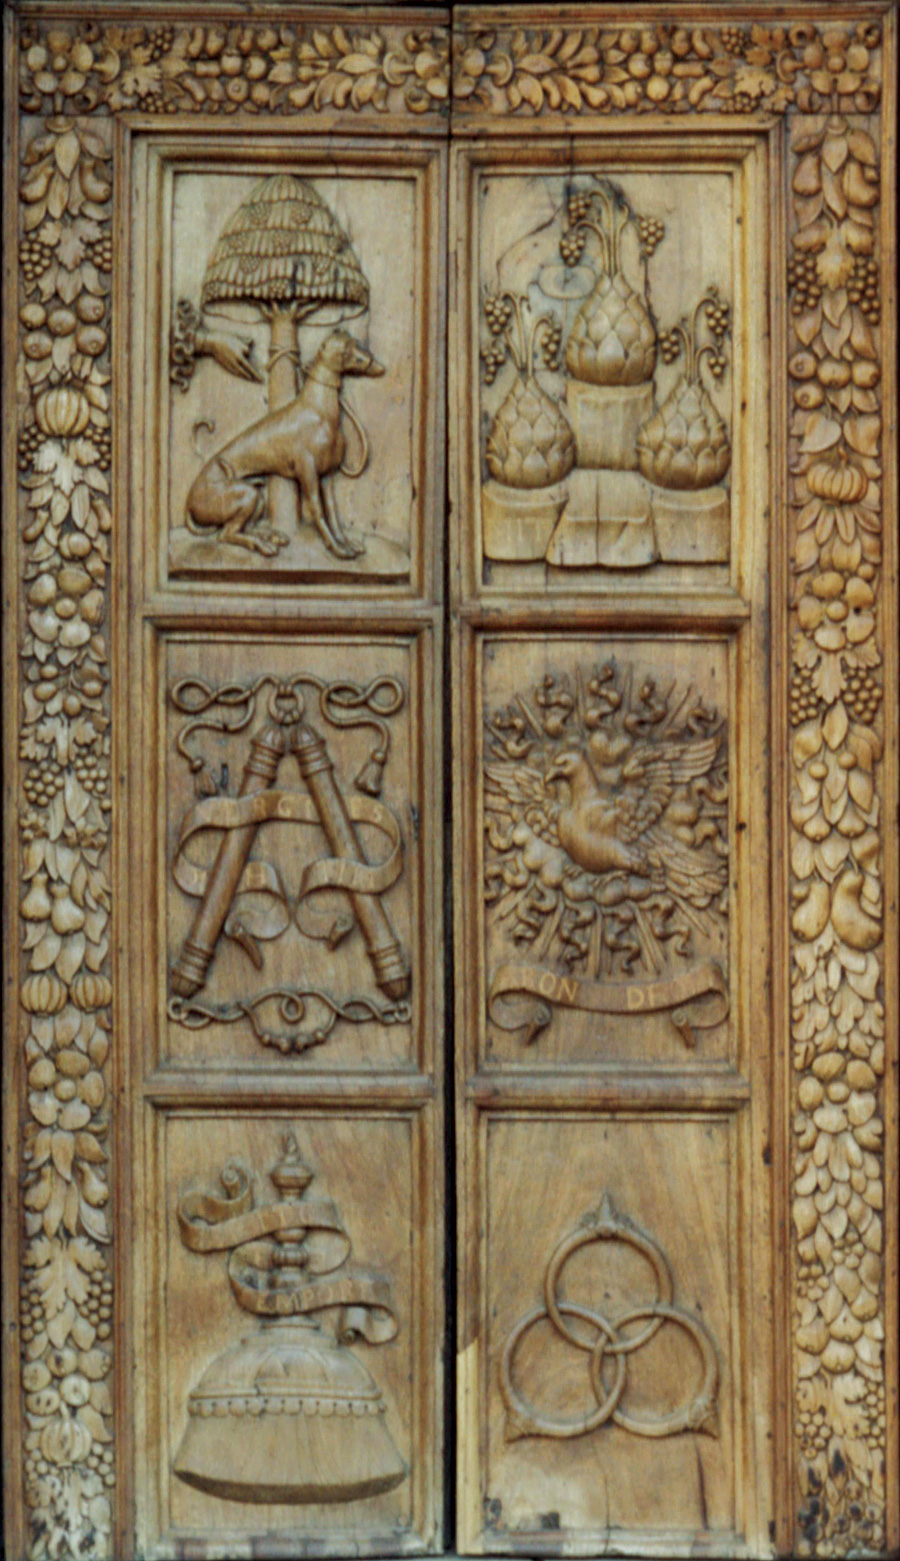 A photograph of the door of the Church of San Sigismondo in Cremona, where Bianca Maria Visconti and Francesco Sforza were married in fourteen forty one. Sforza’s family emblems, including the Borromean rings, are carved on the door.